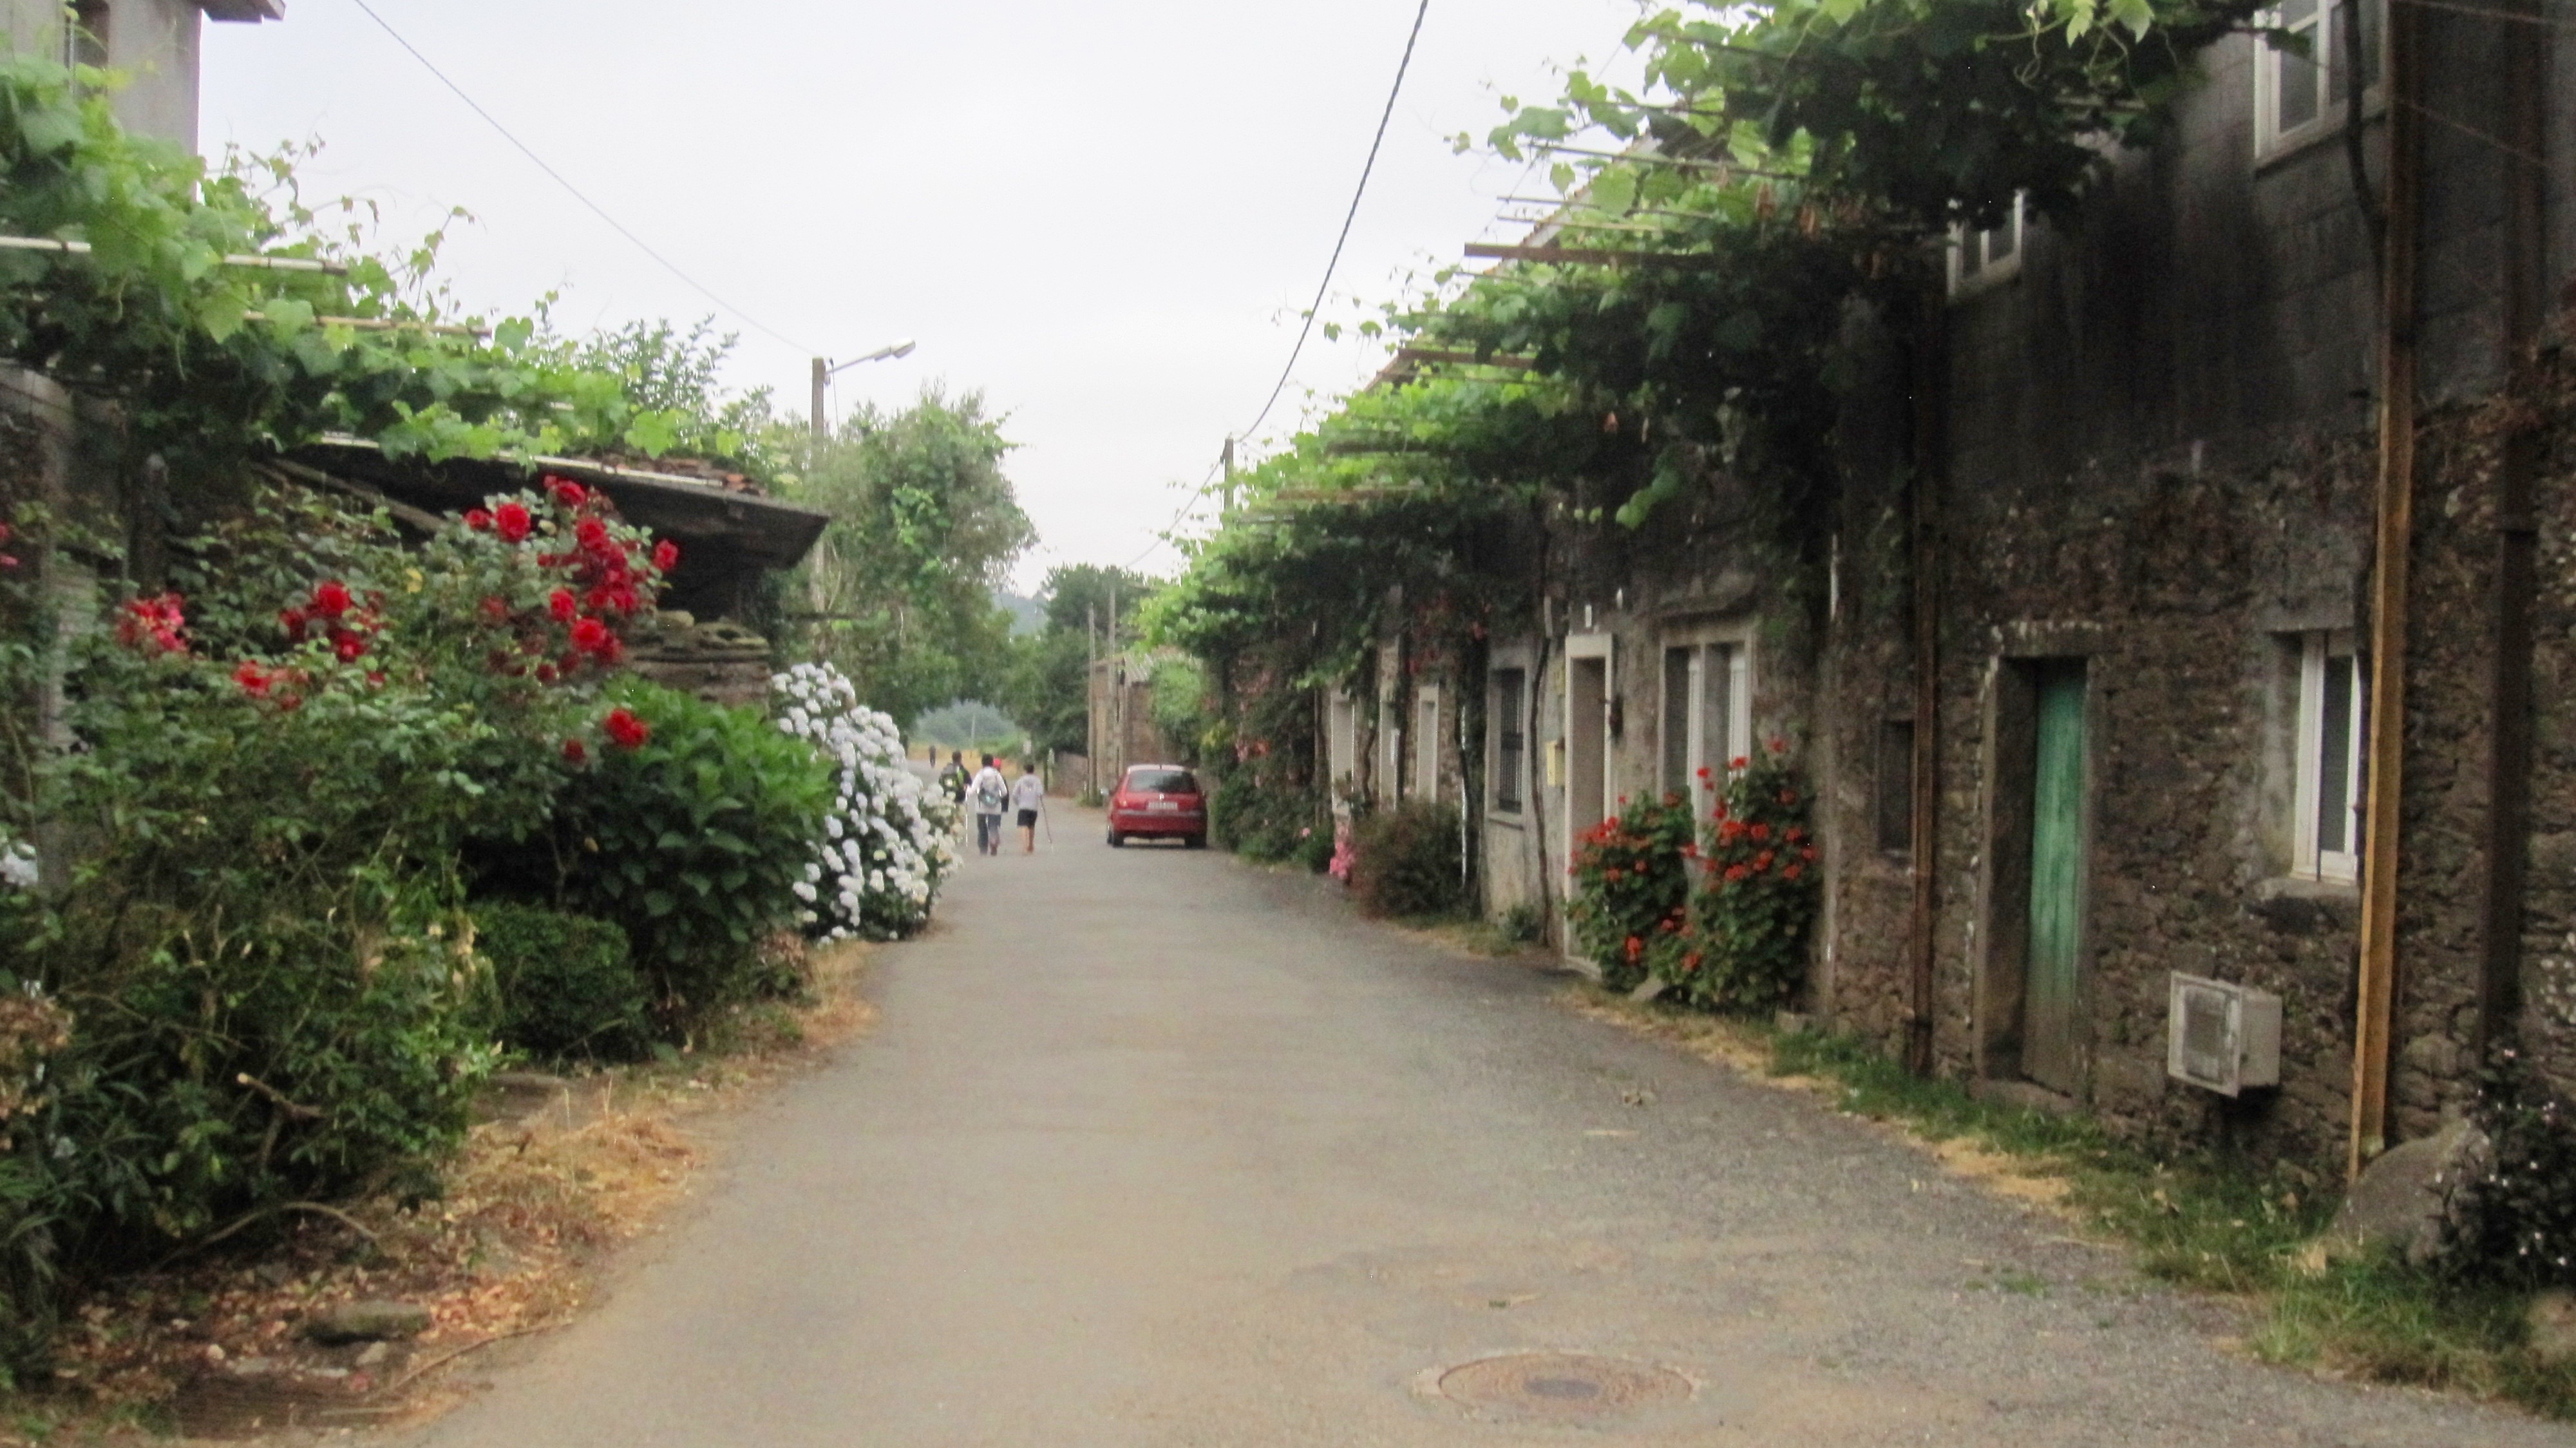 In general, the villages I passed where nice and well kept. However, often the path was on the street.